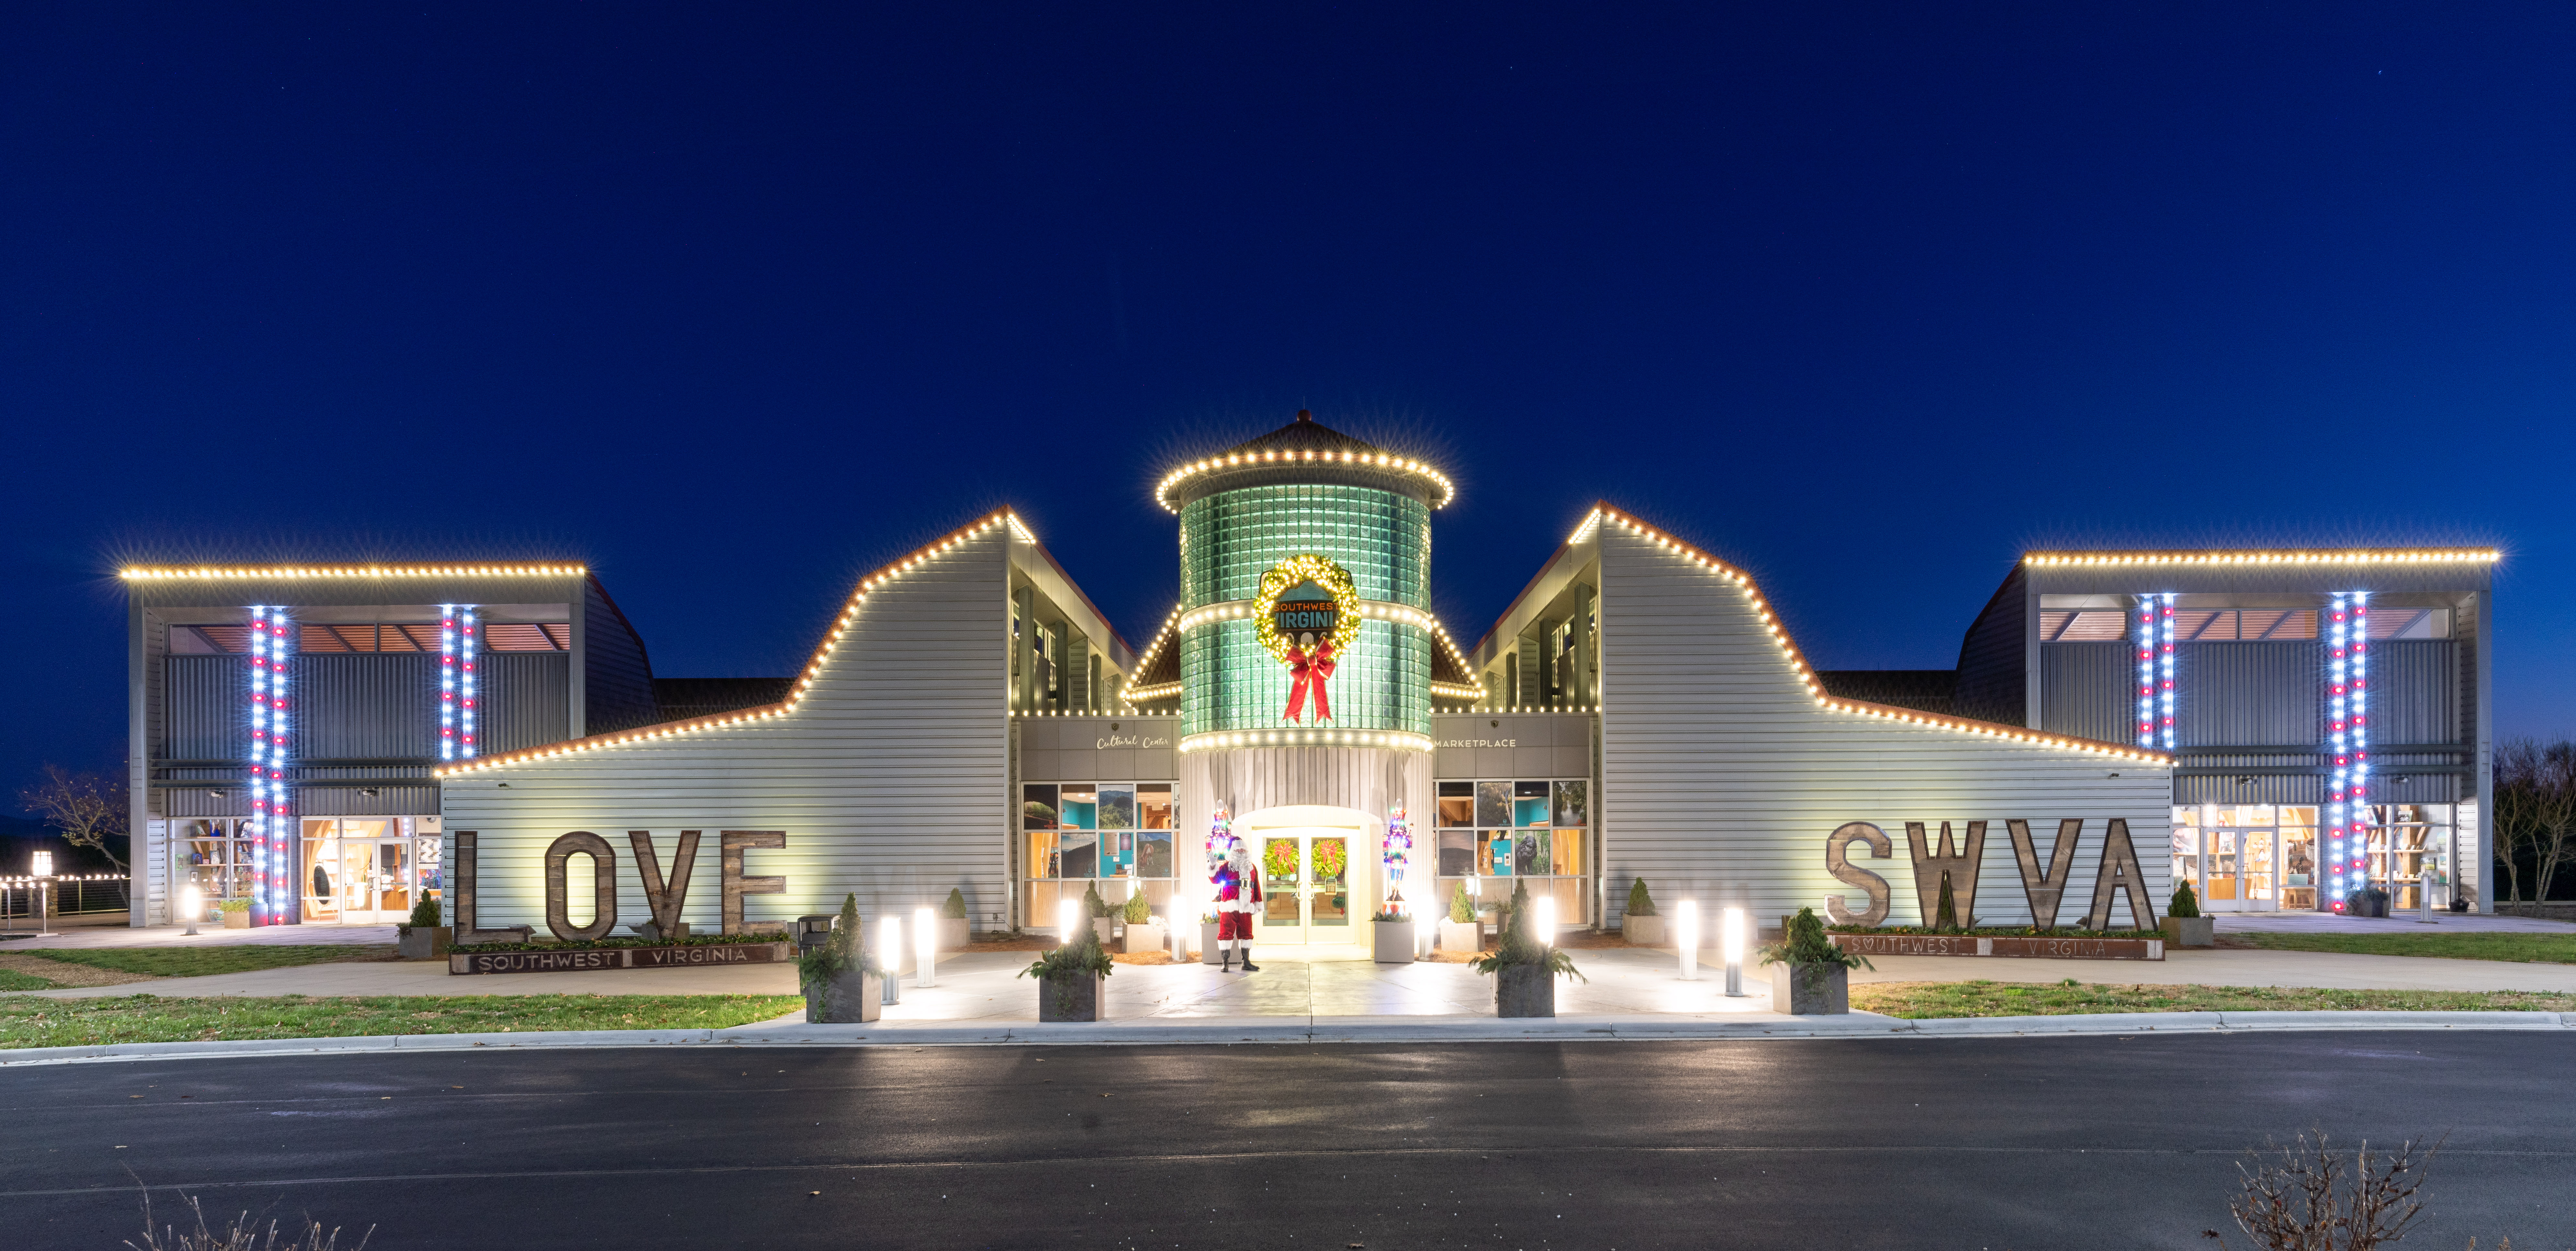 The Southwest Virginia Cultural Center & Marketplace is an artisan retail center for 'Round the Mountain.